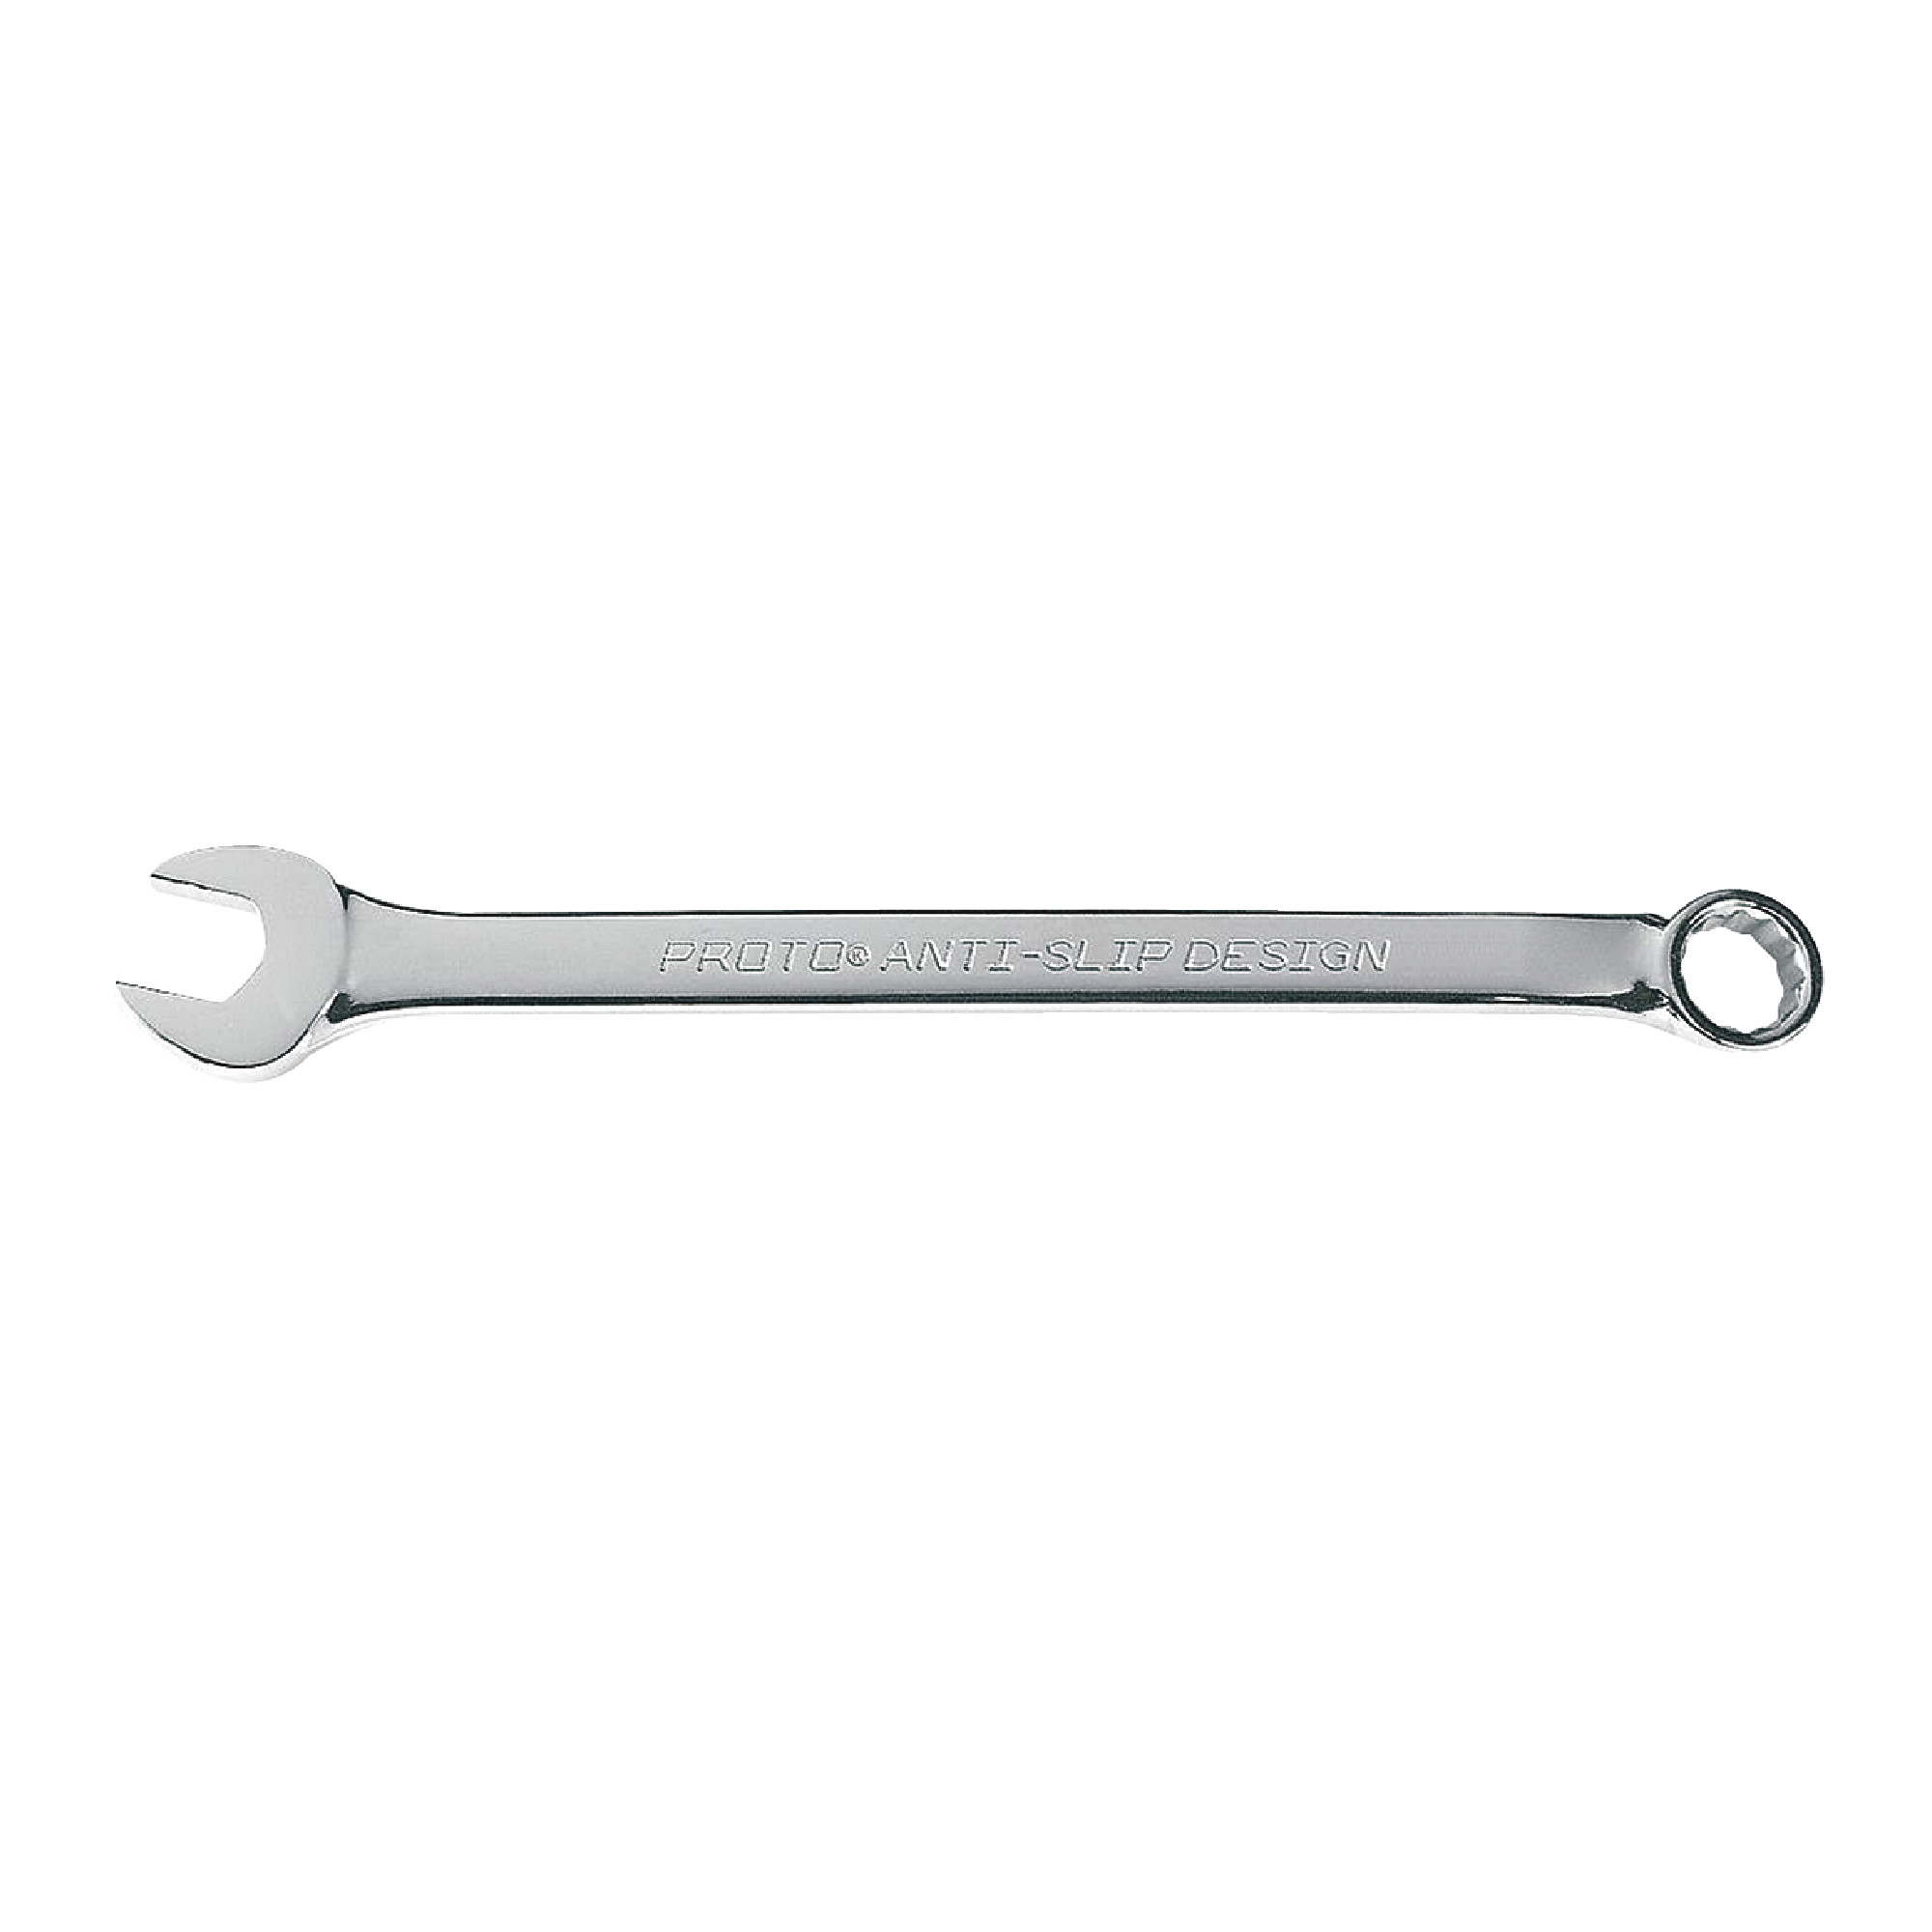 Satin Chrome Finish 23mm Combination Wrench